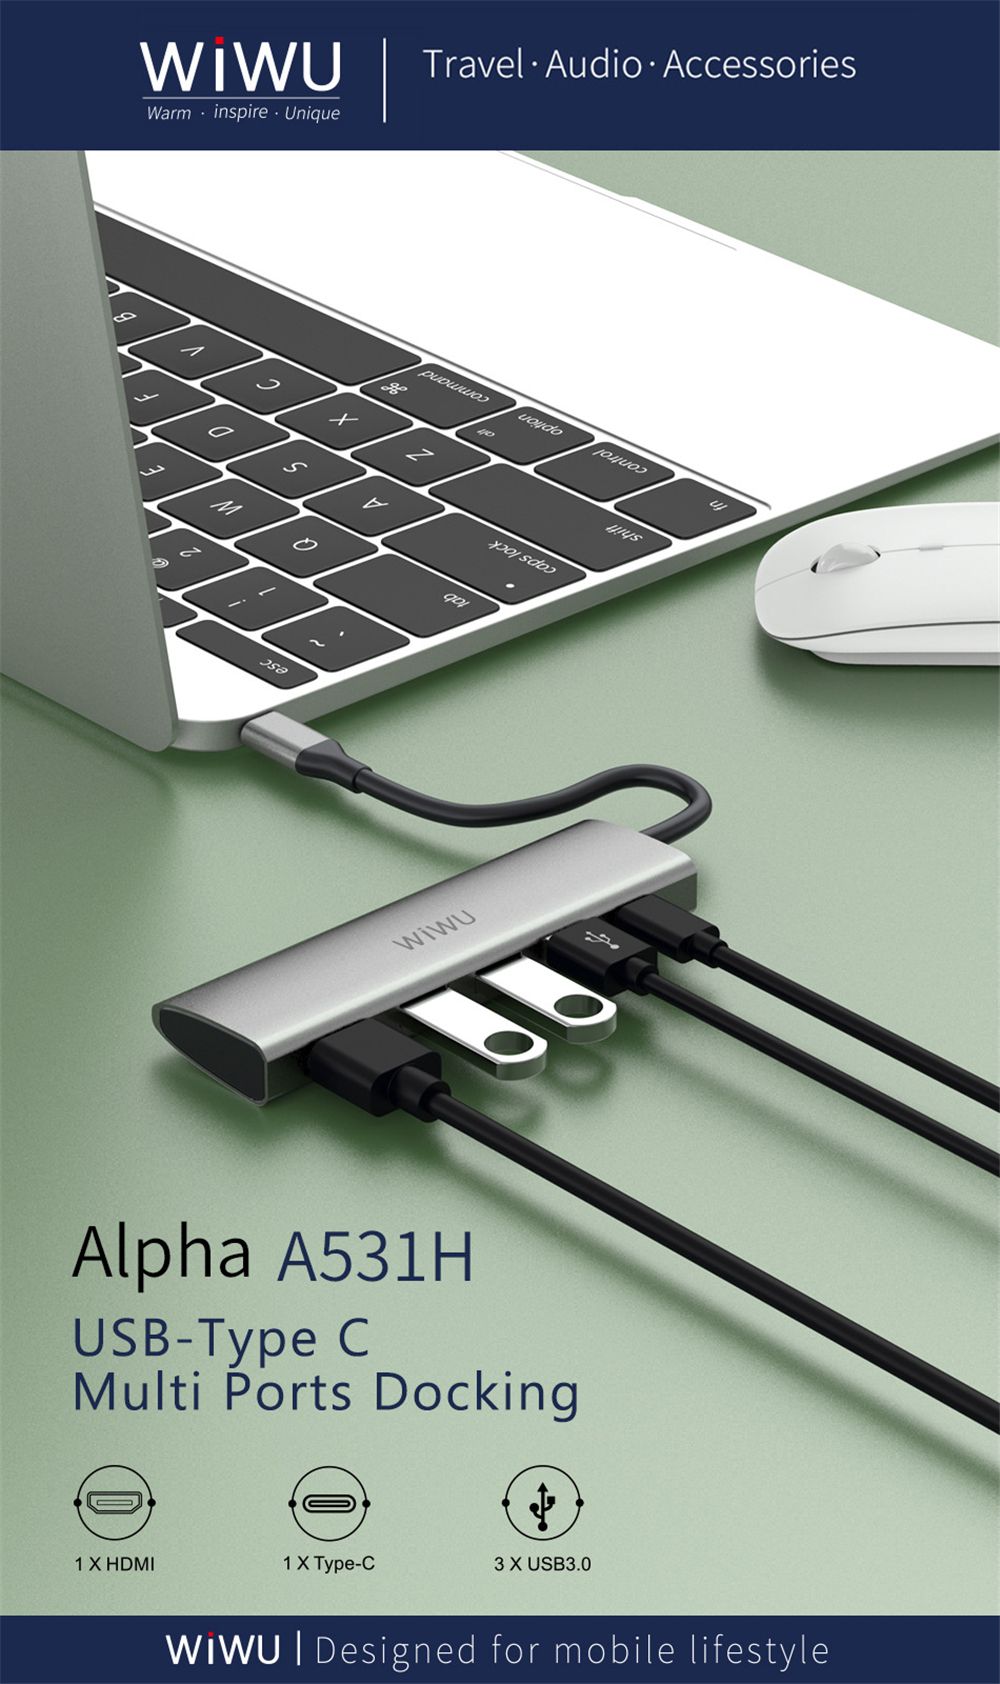 WiWU-Alpha-A531H-5-in-1-USB-C-Hub-Type-C-to-USB30-Adapter-HD-Converter-Multi-functional-Docking-Stat-1722770